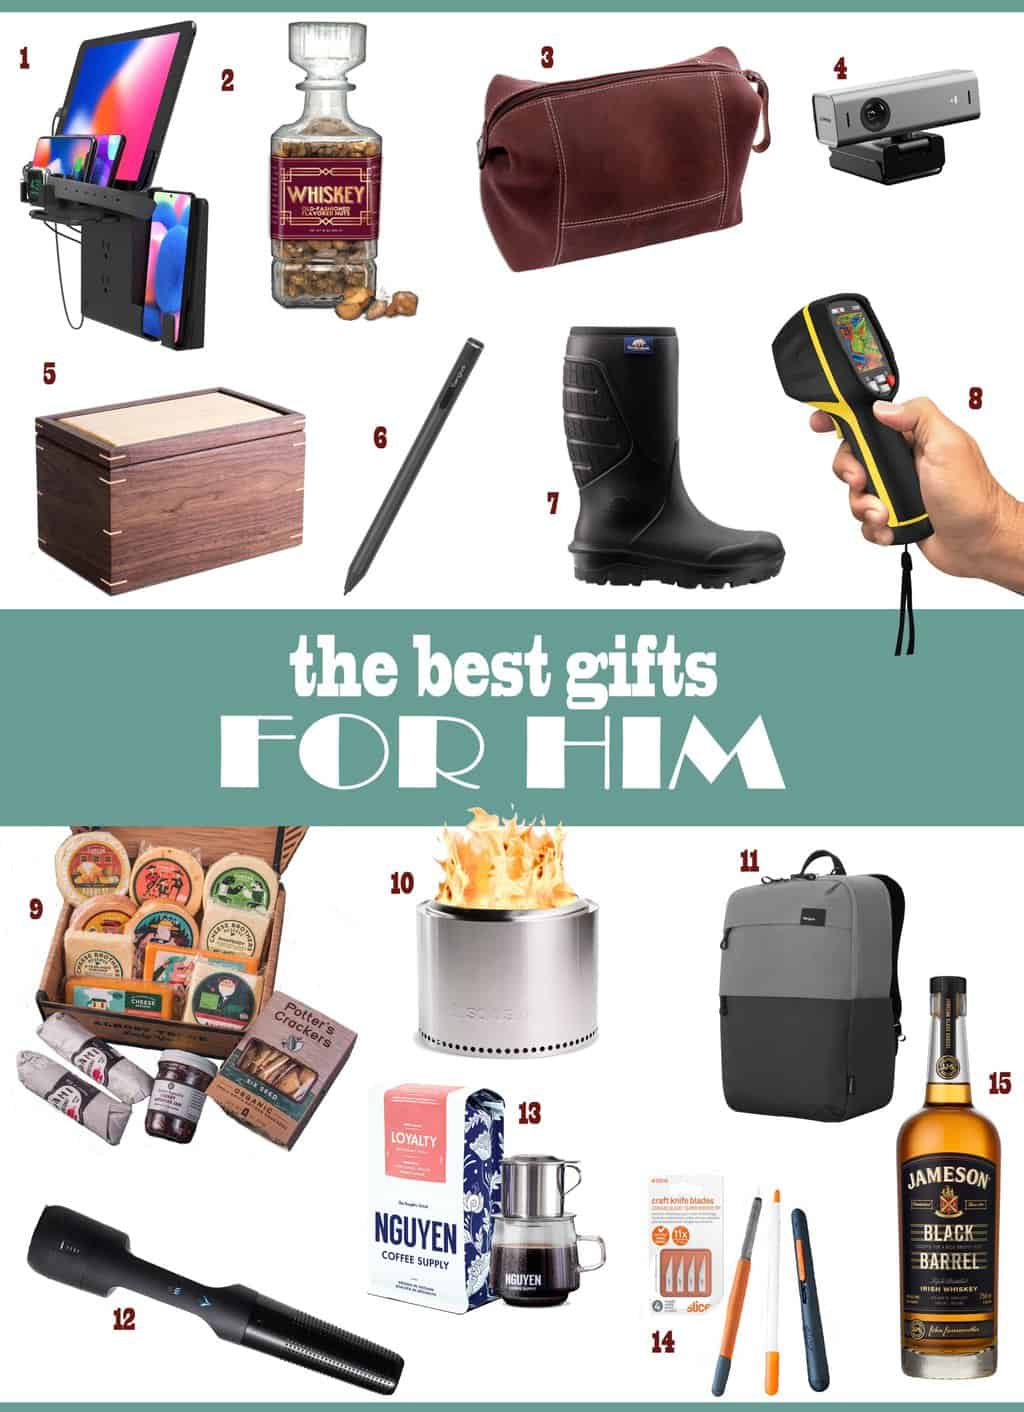 Gift Ideas for Men: Awesome List of Gifts for Him - IKEA